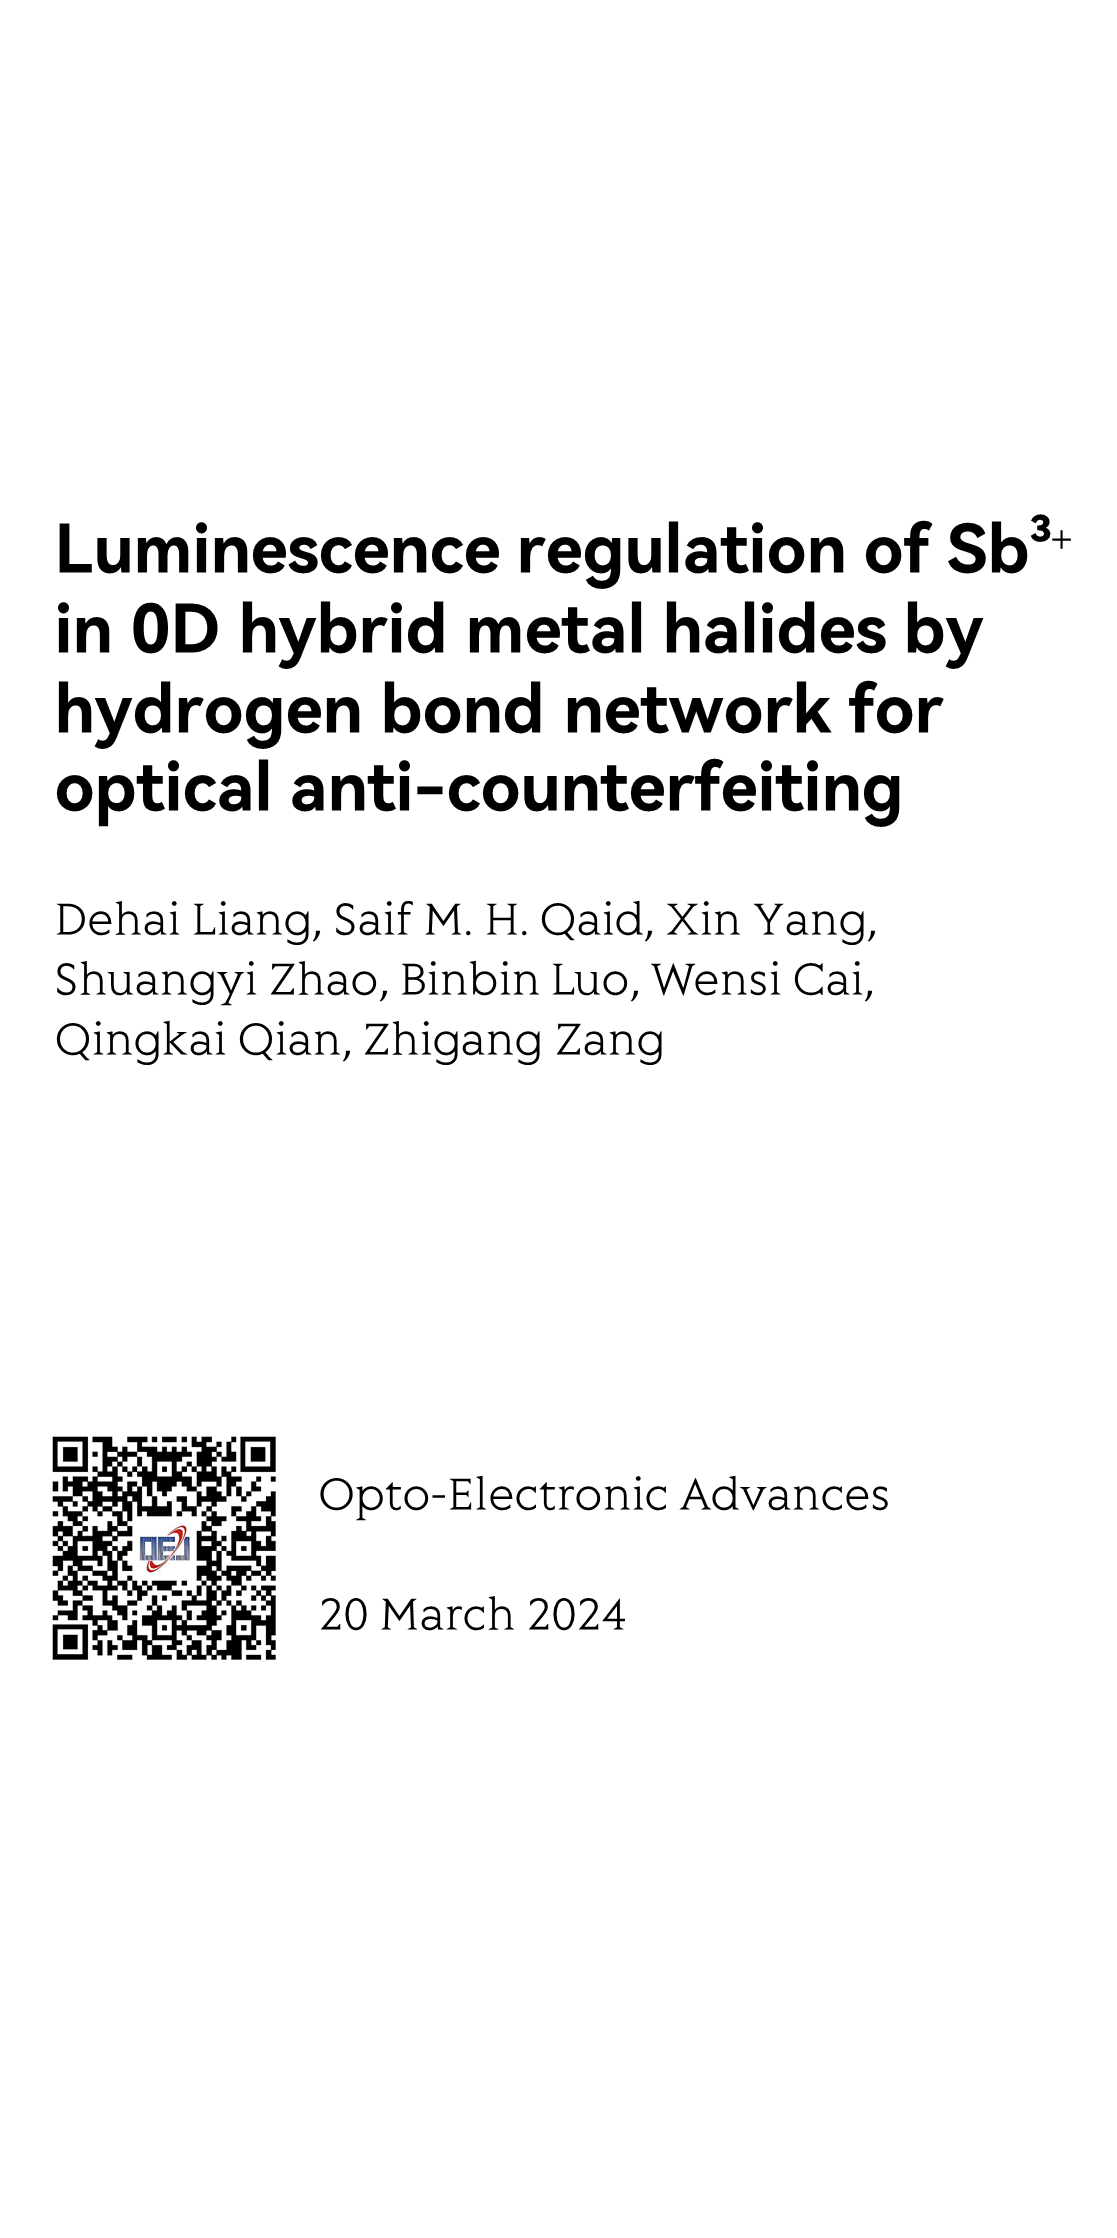 Luminescence regulation of Sb3+ in 0D hybrid metal halides by hydrogen bond network for optical anti-counterfeiting_1